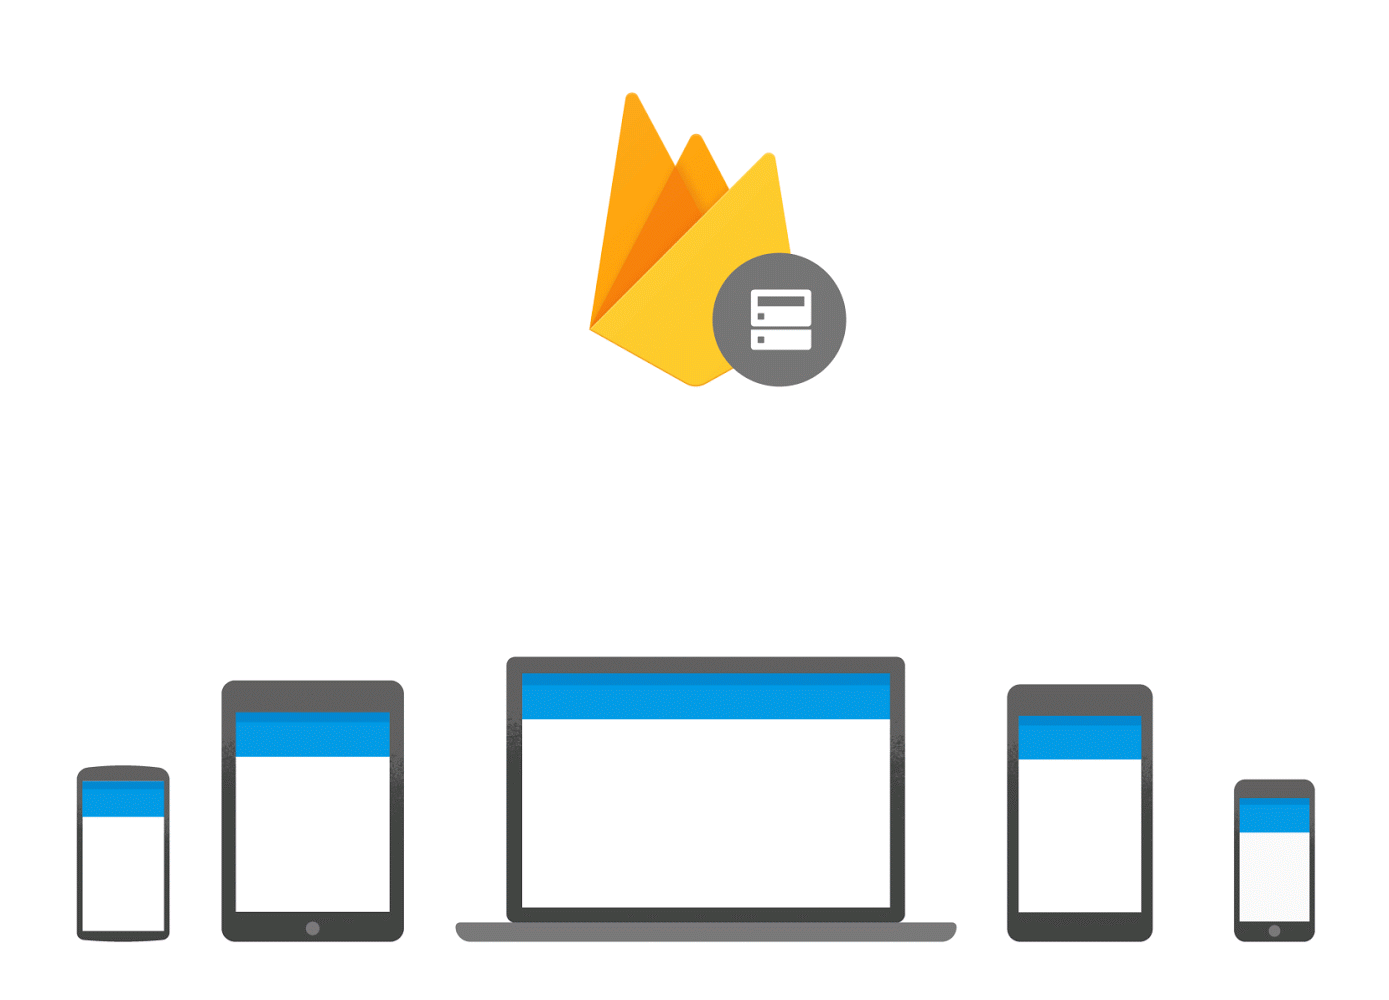 Google firebase real time database system architecture